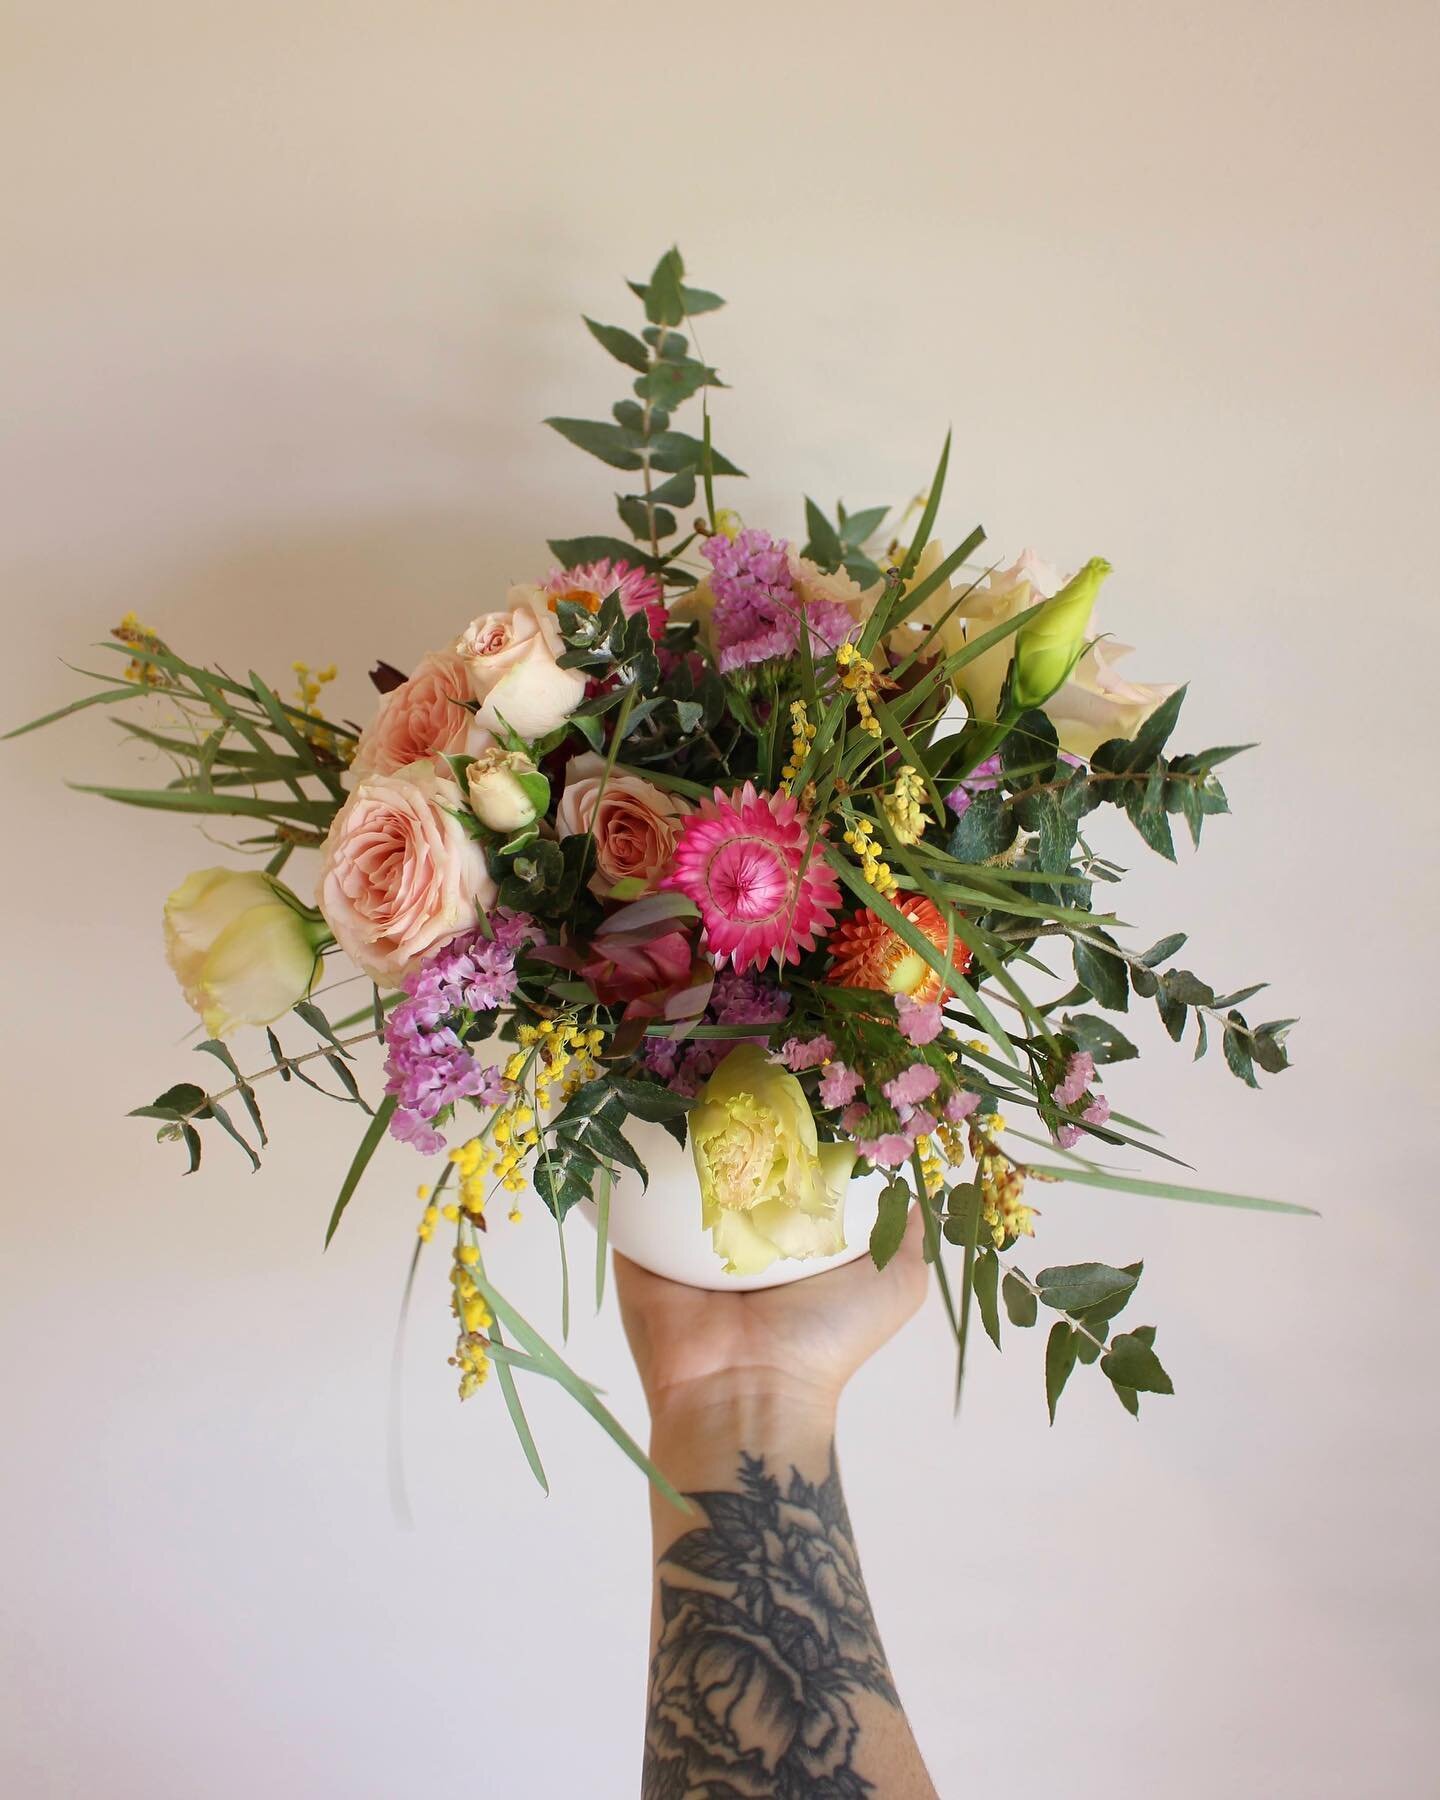 Do you have plans this weekend? 🌼

Learn how to create your very own fresh floral centrepiece this Sunday 21st May at our upcoming workshop! 💐✂️

What&rsquo;s Included:
- Fresh, seasonal, Australian-grown flowers 
- White ceramic vase
- All florist